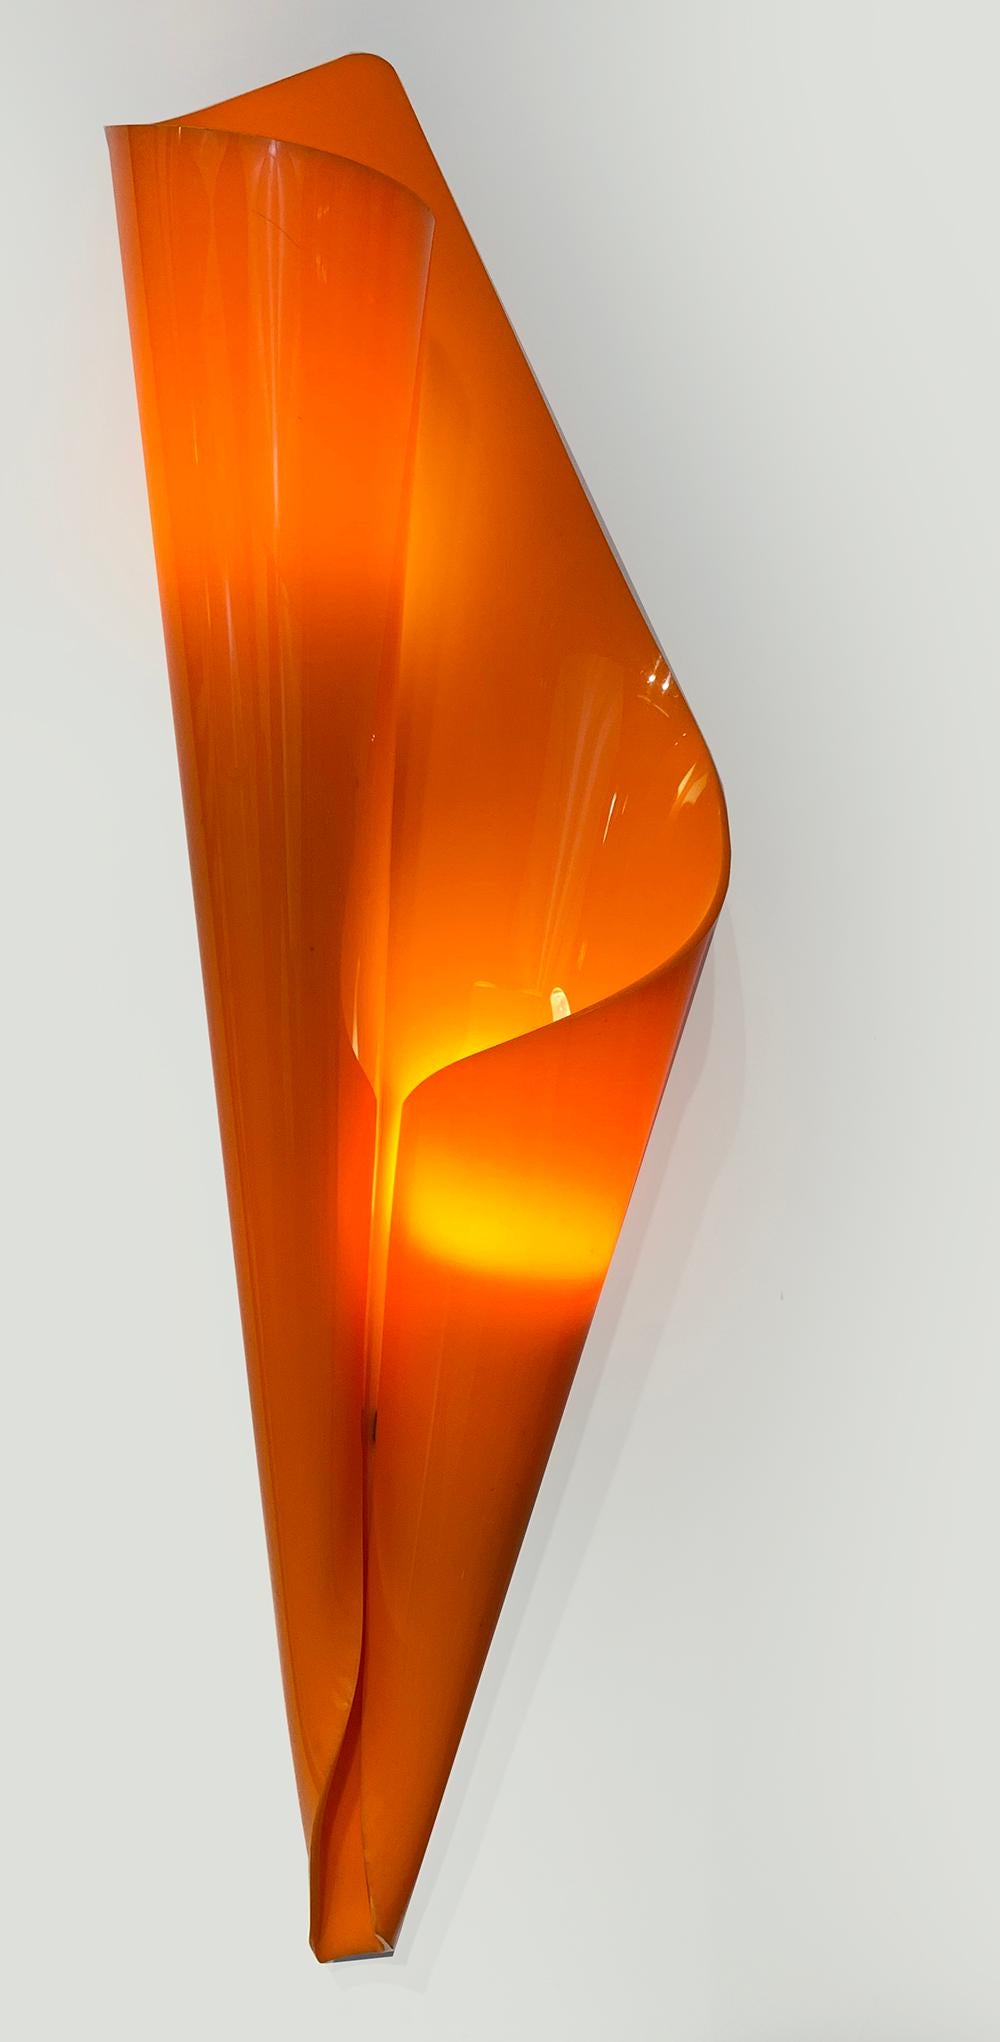 Extremely rare, sculptural Mid-Century Modern Lucite pair of sconces colored in orange and yellow . 
Designed by Hanns Hoffmann-Lederer in 1950s for Heinz Hecht, Darmstadt, Germany.
 